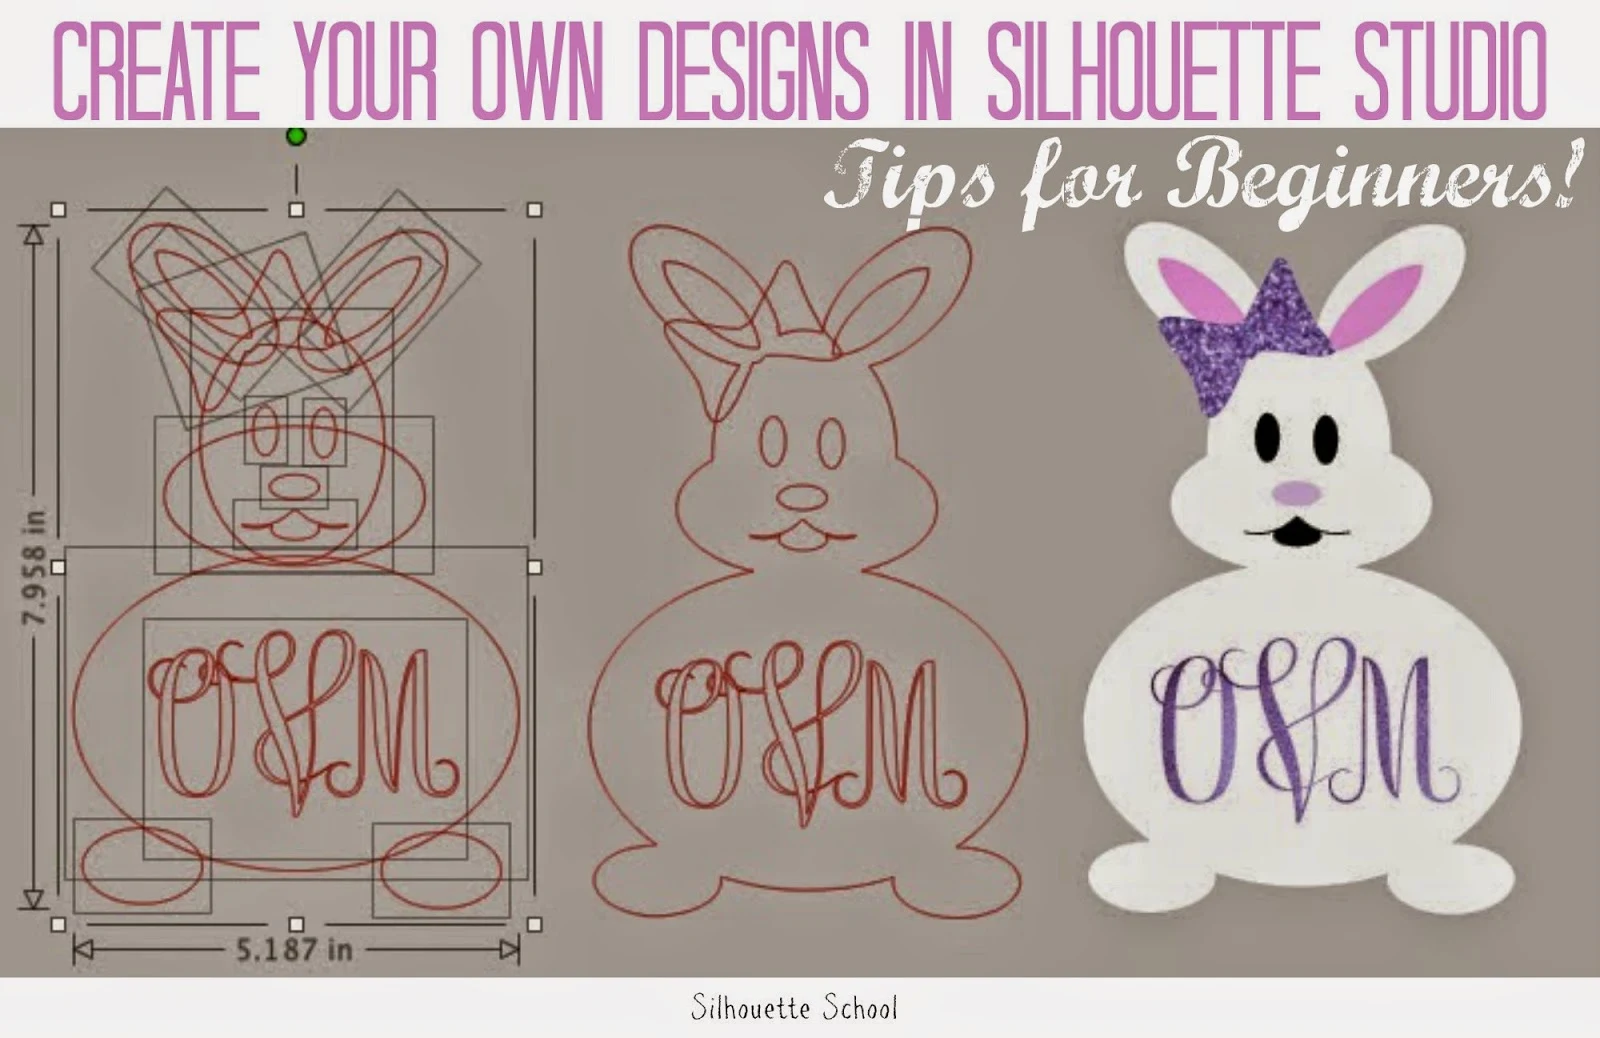 Silhouette Studio, tips, beginners, designing your own shapes